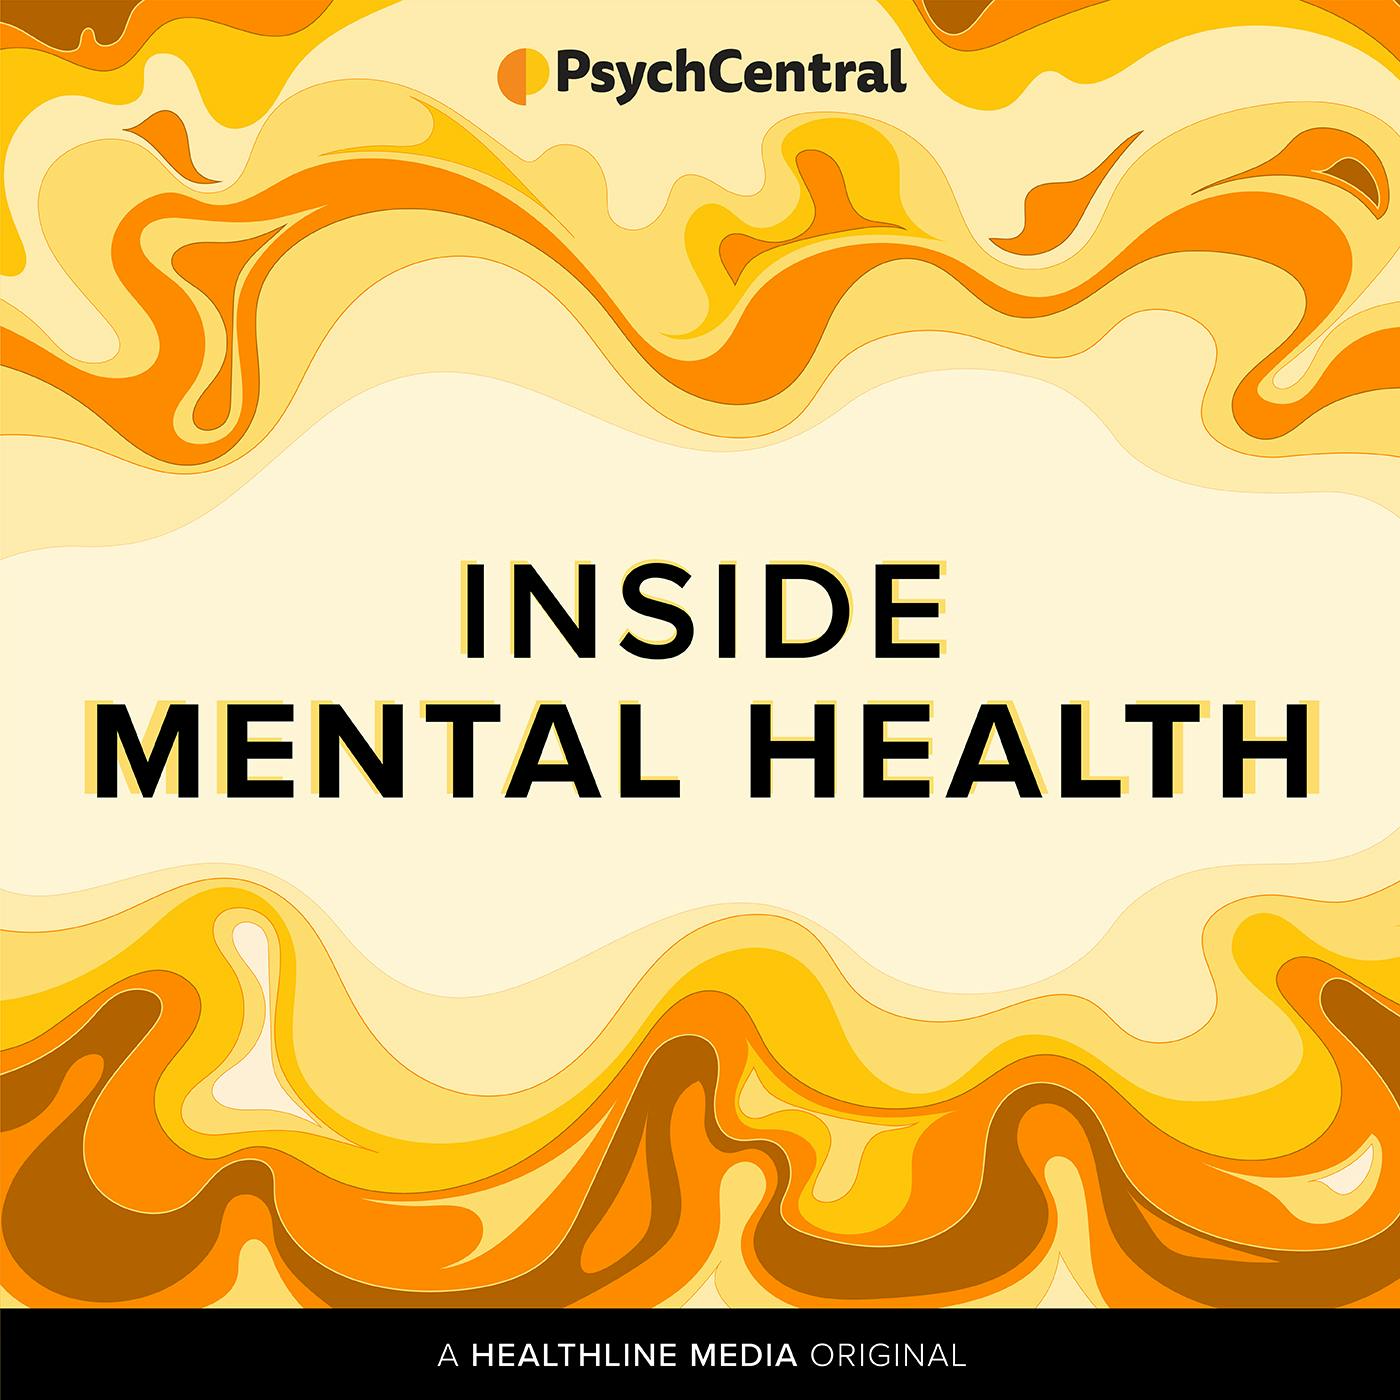 Benefits of a Video Library Documenting Mental Health Issues